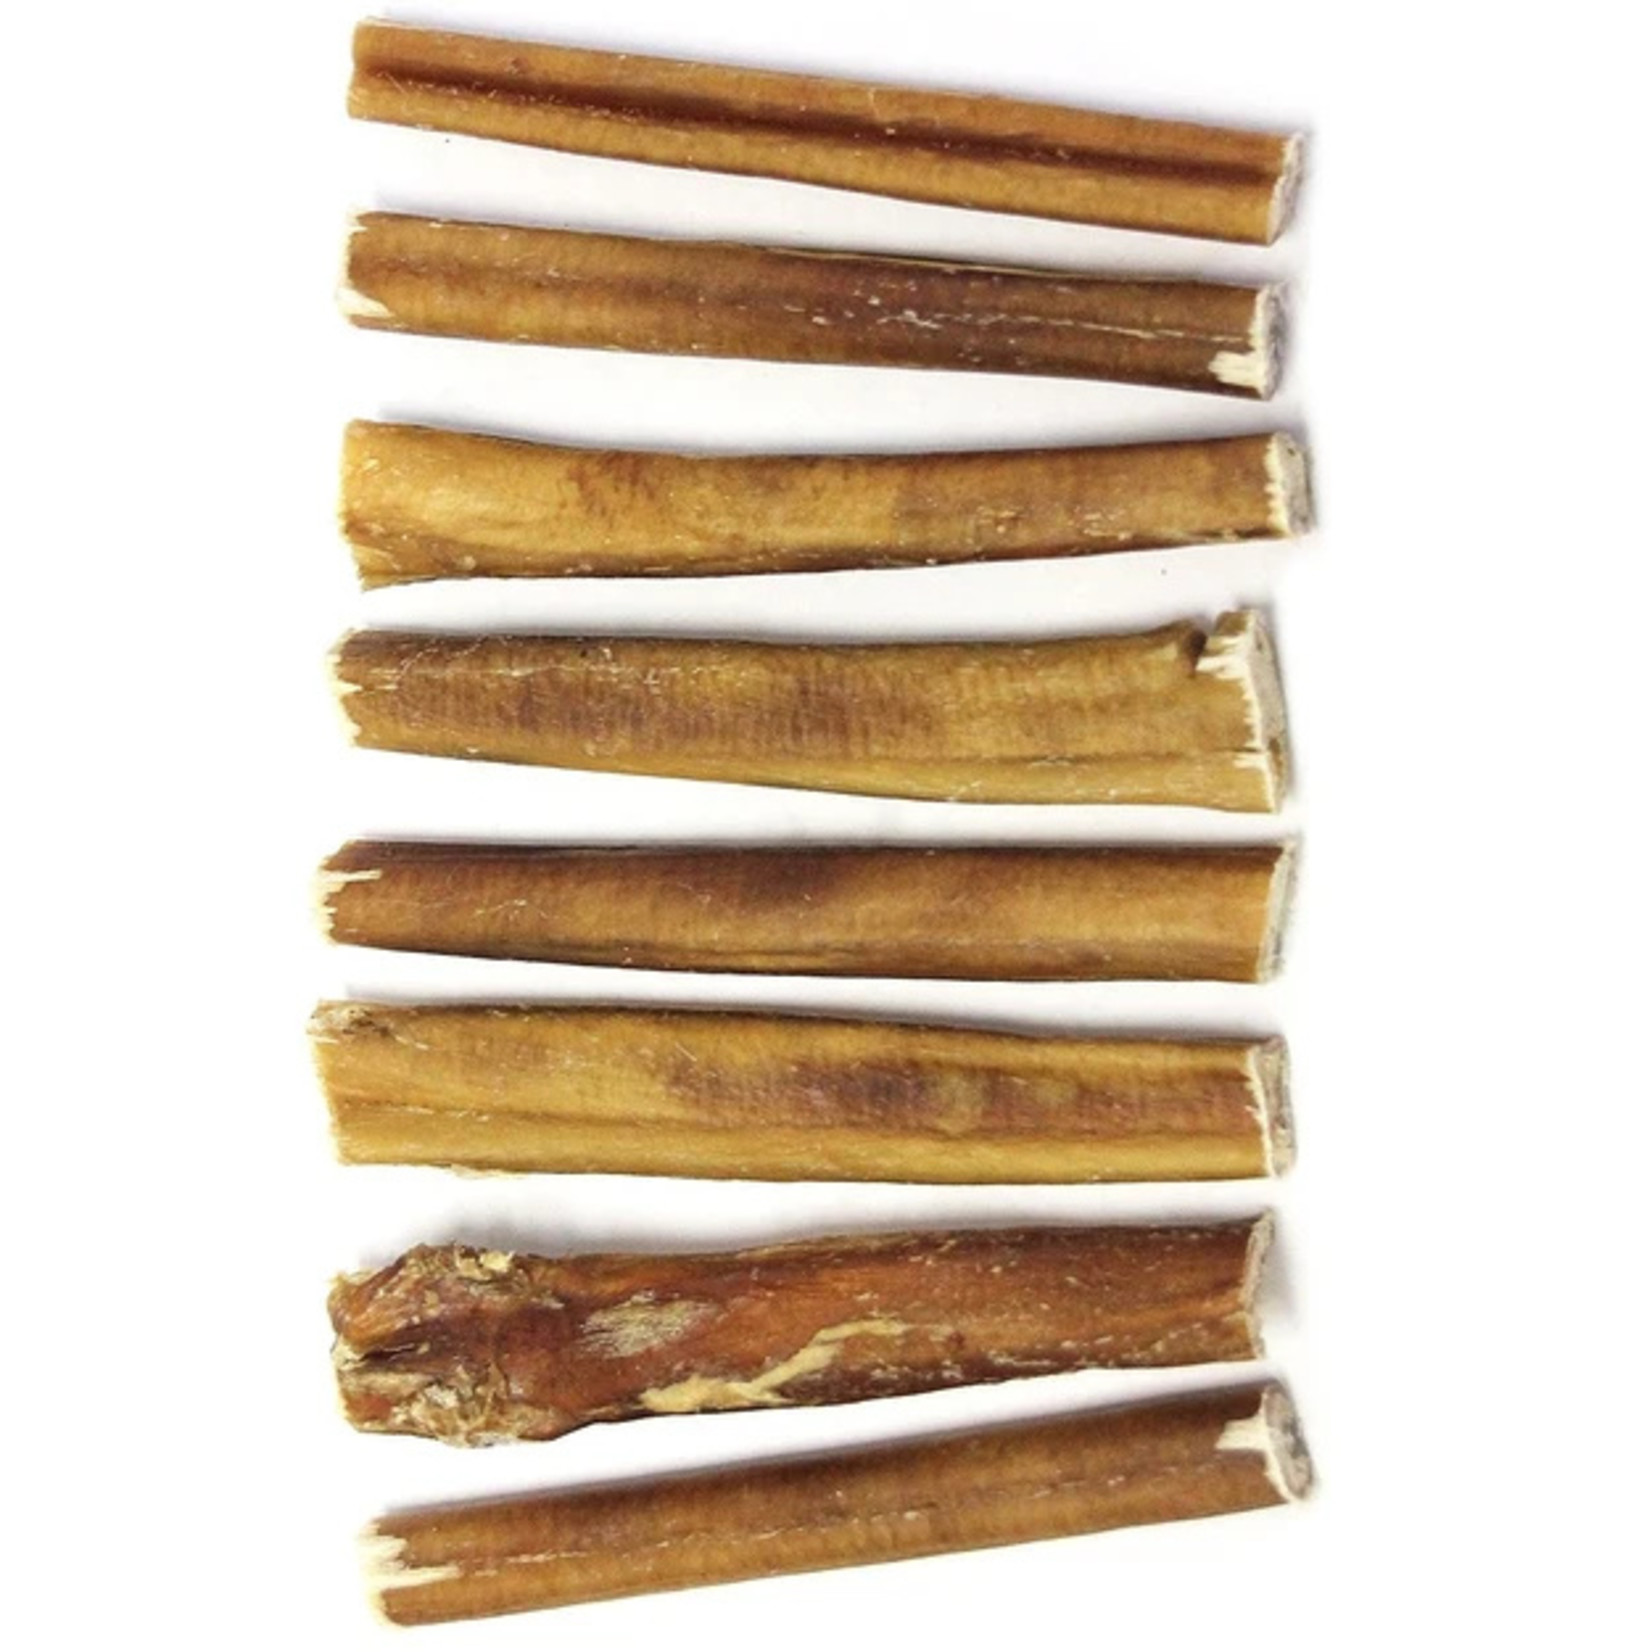 Tuesday's Natural Dog Company 6" Thick Bully Stick